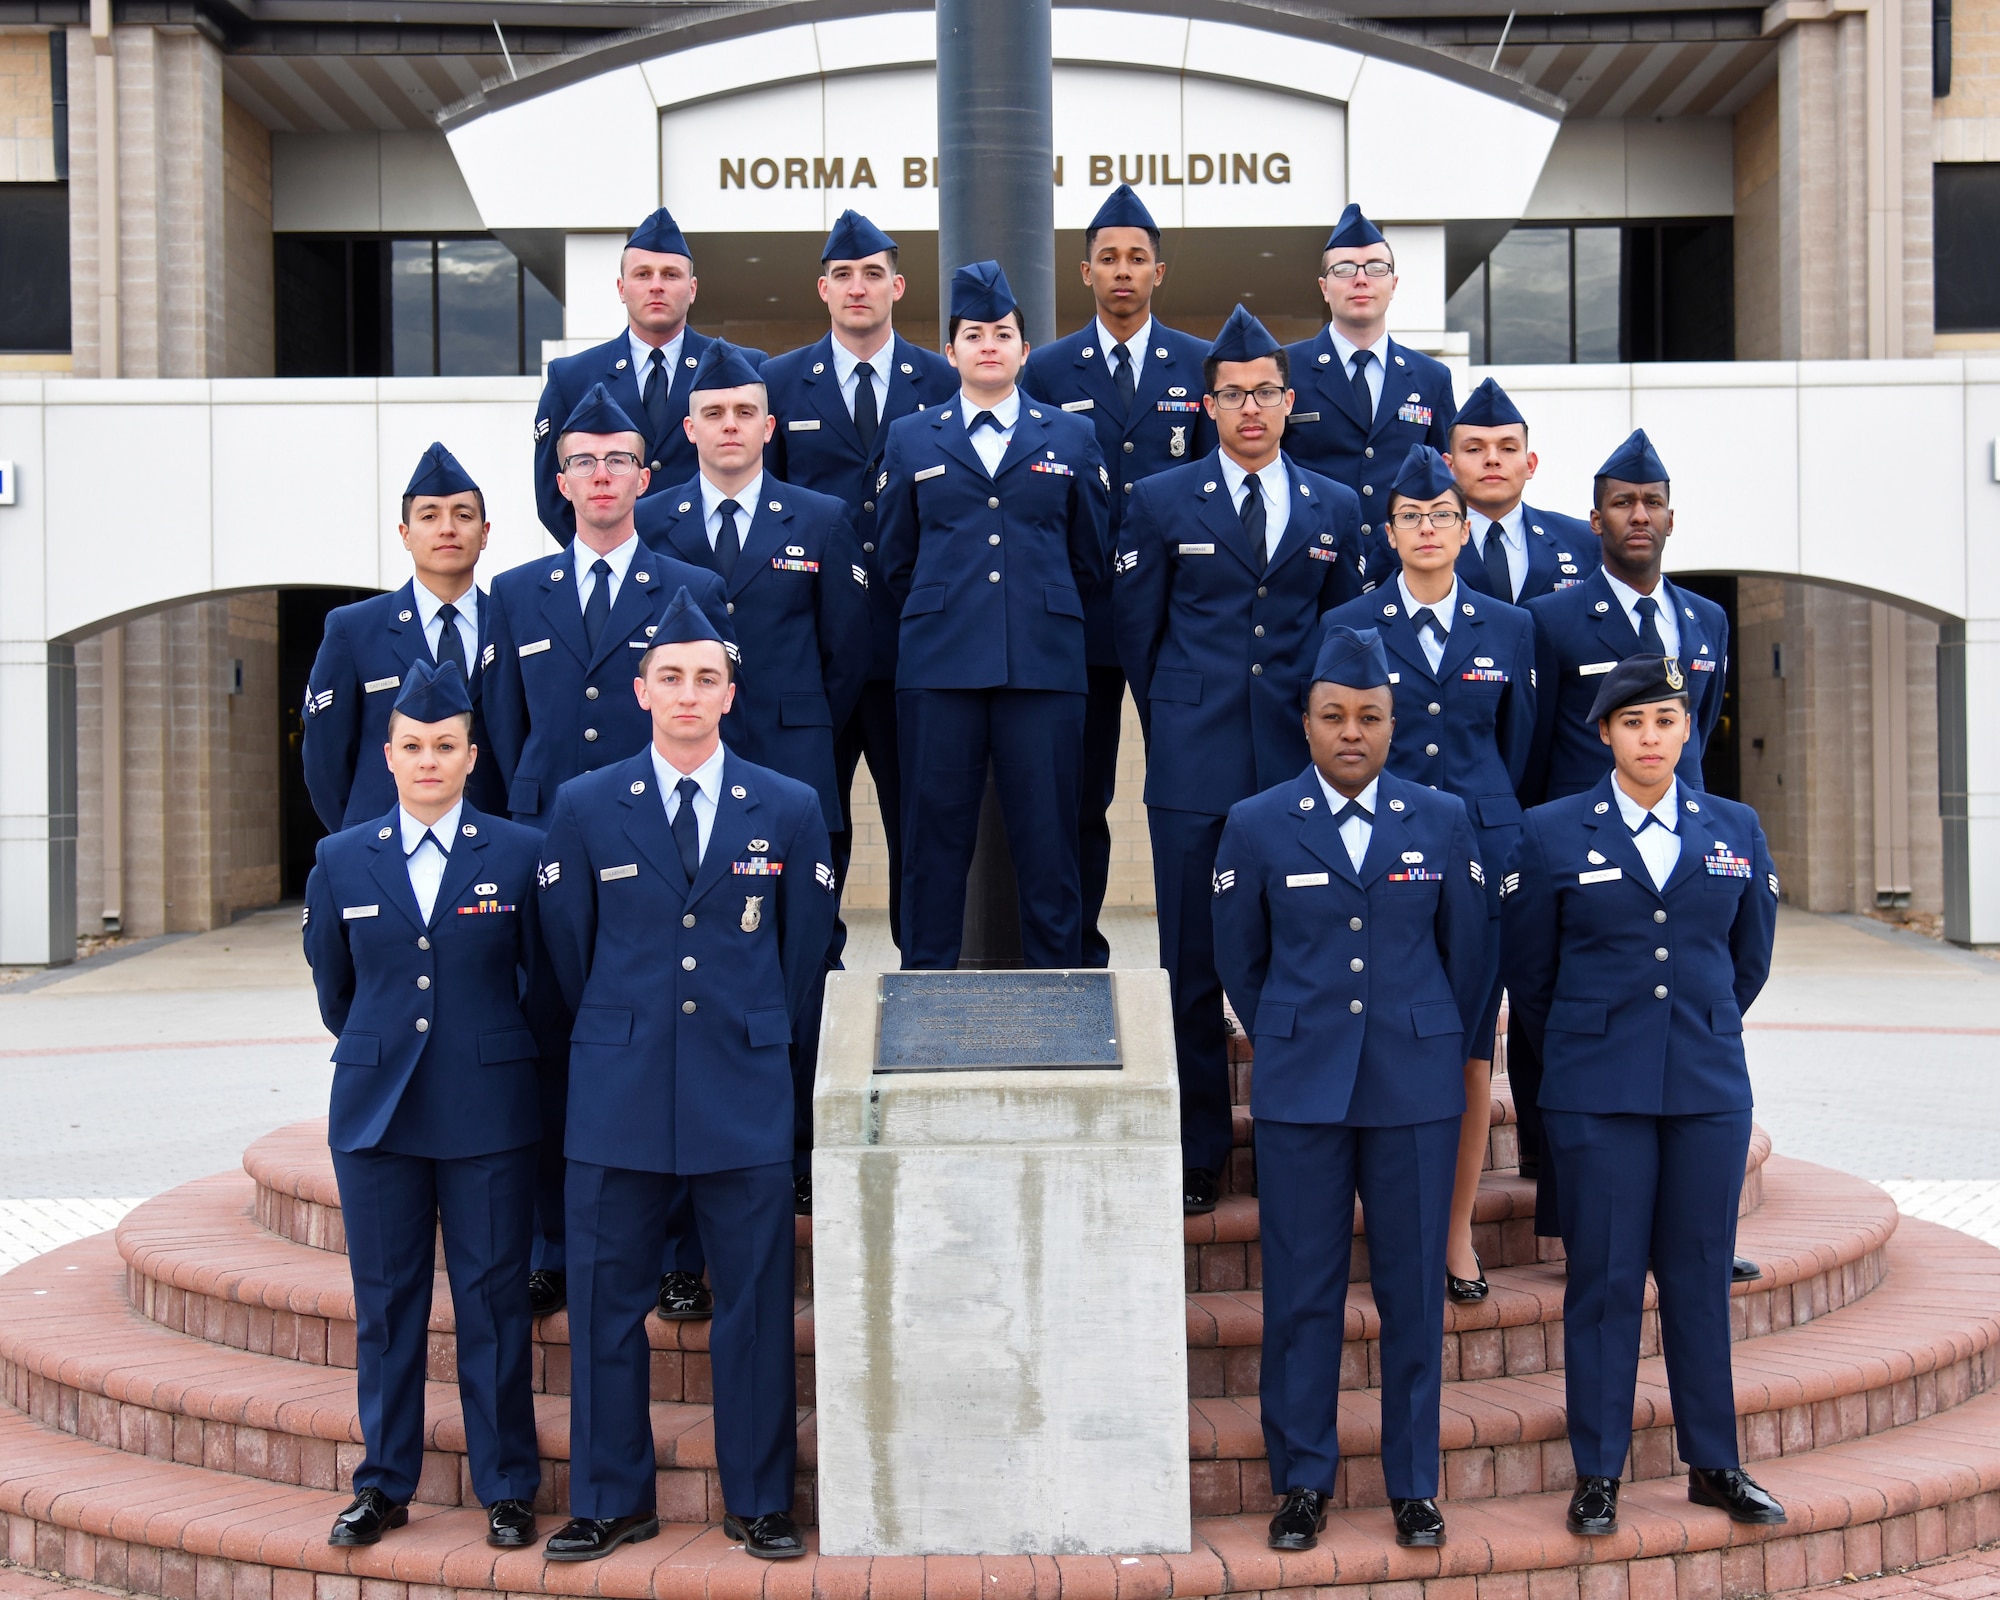 Graduates of Airman Leadership School Class 20-A pose for a class photo on Goodfellow Air Force Base, Texas, November 27, 2019. ALS is a four-week course designed to give senior airmen an understanding of their role as military supervisors and how they contribute to the overall goals and mission of the Air Force. (U.S. Air Force photo by Airman 1st Class Ethan Sherwood)